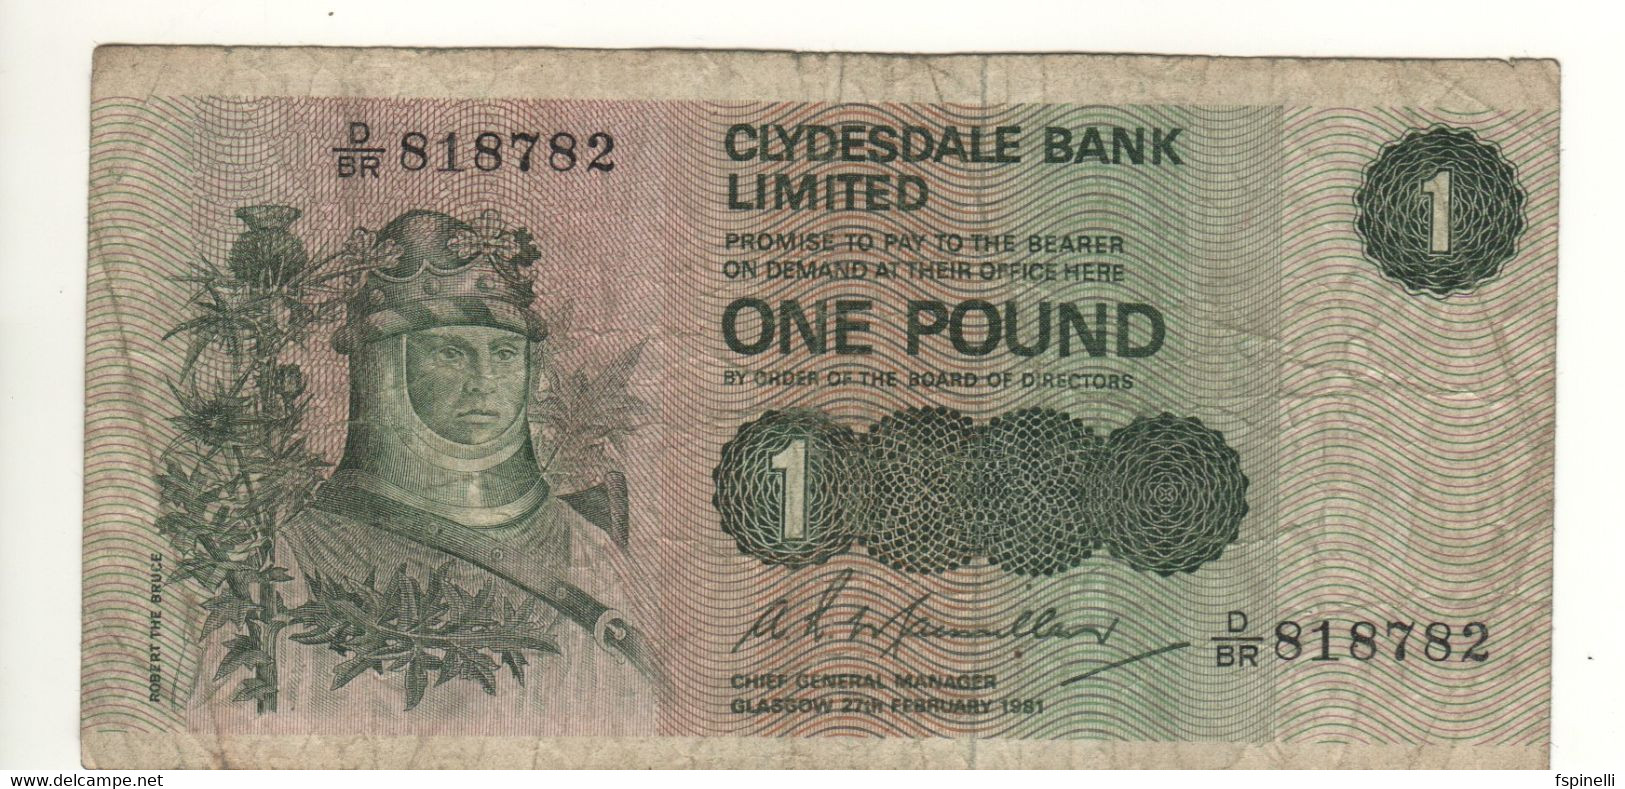 SCOTLAND  1 Pound  Clydesdale Bank   P204c    Dated  Glasgow 27th  February 1981 - 1 Pound